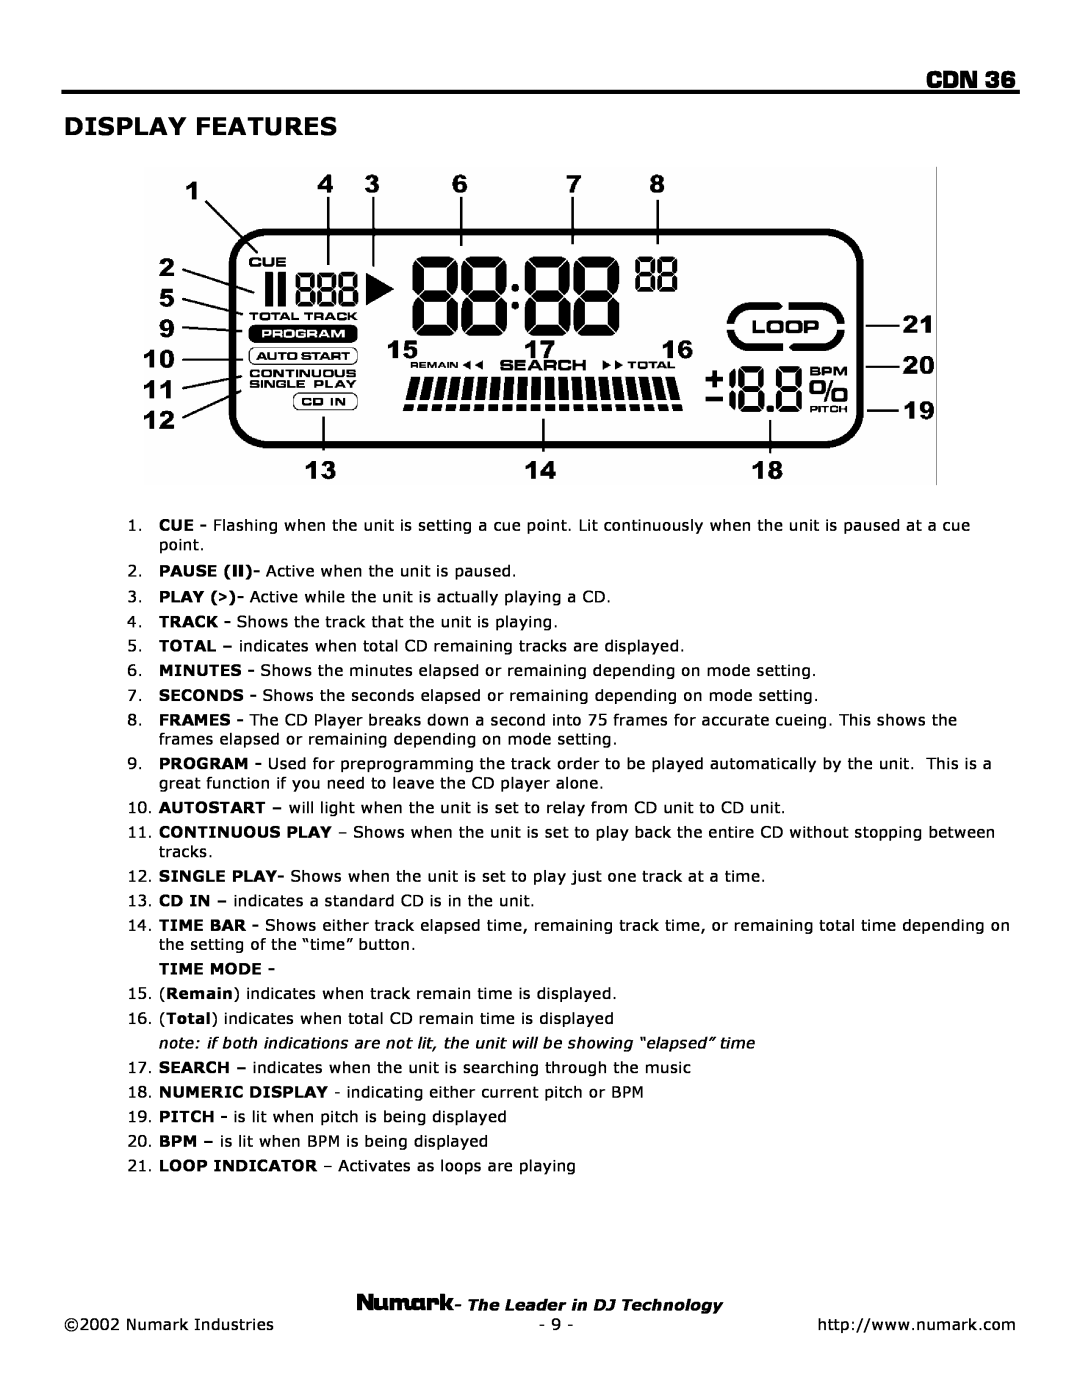 Numark Industries CDN 36 owner manual Display Features, Time Mode 